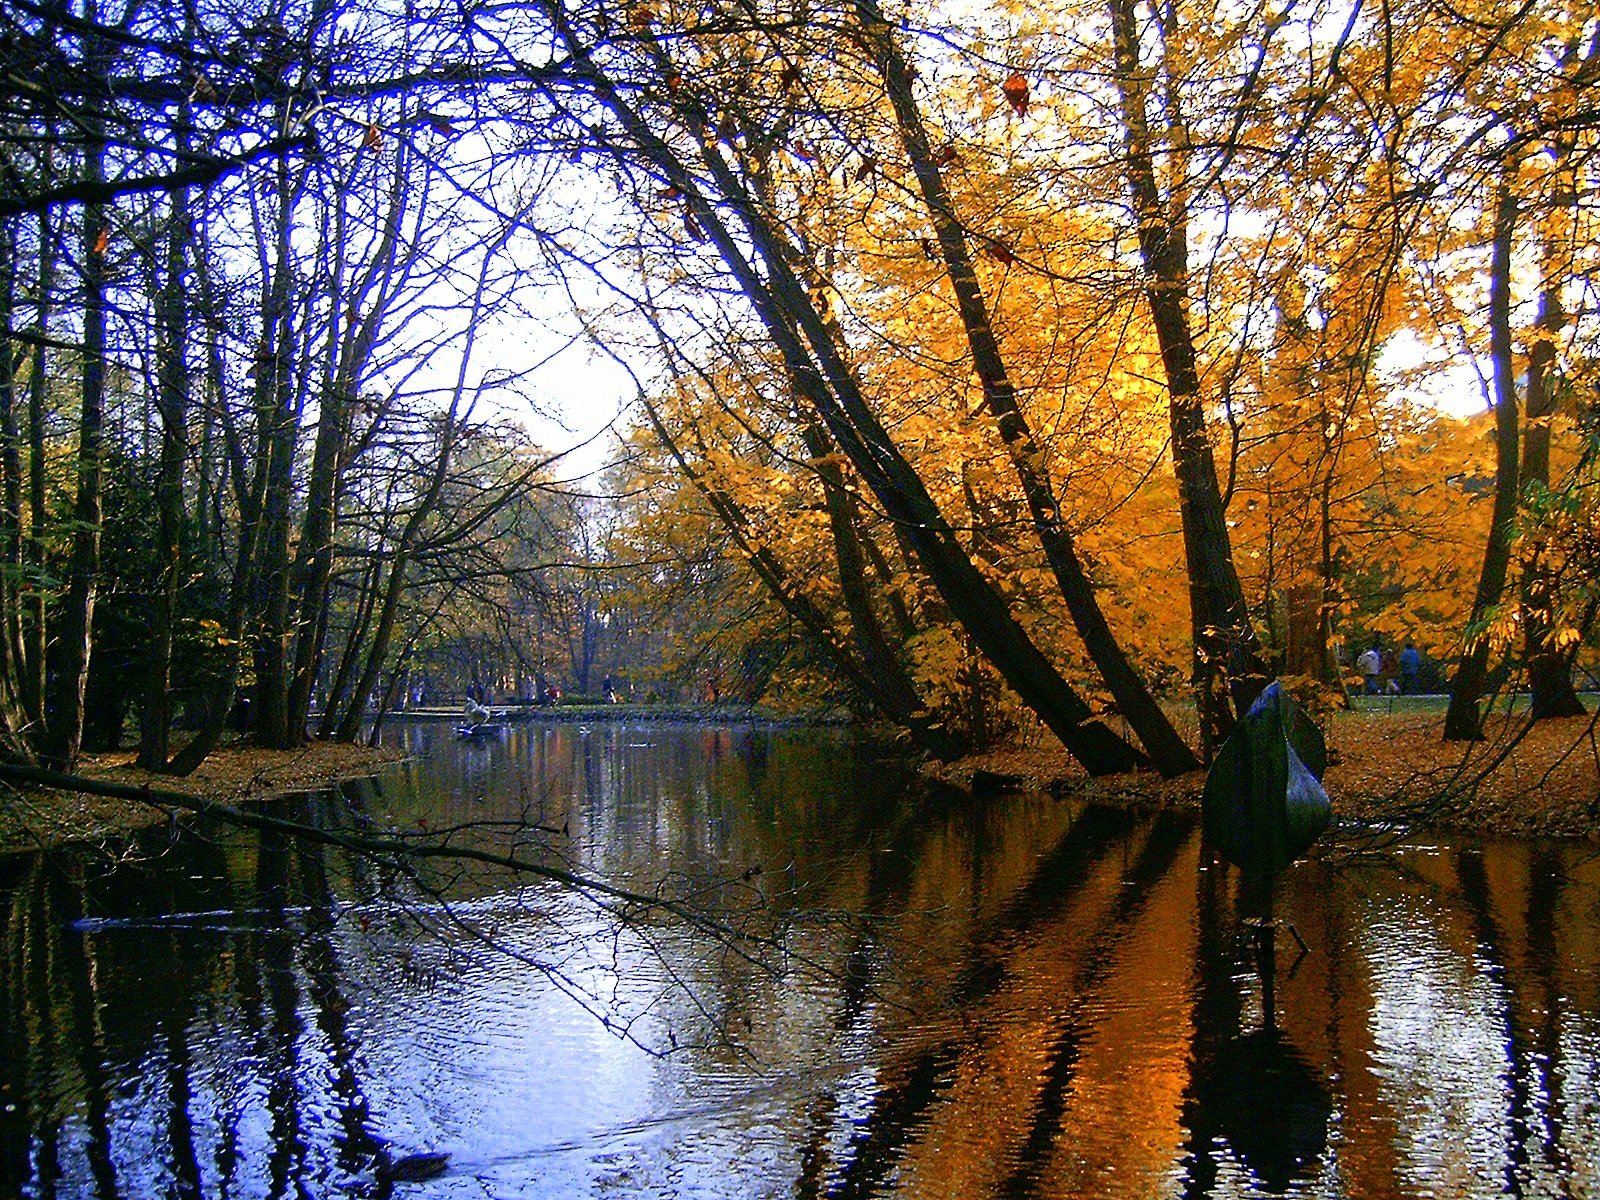 a pond surrounded by trees with yellow leaves